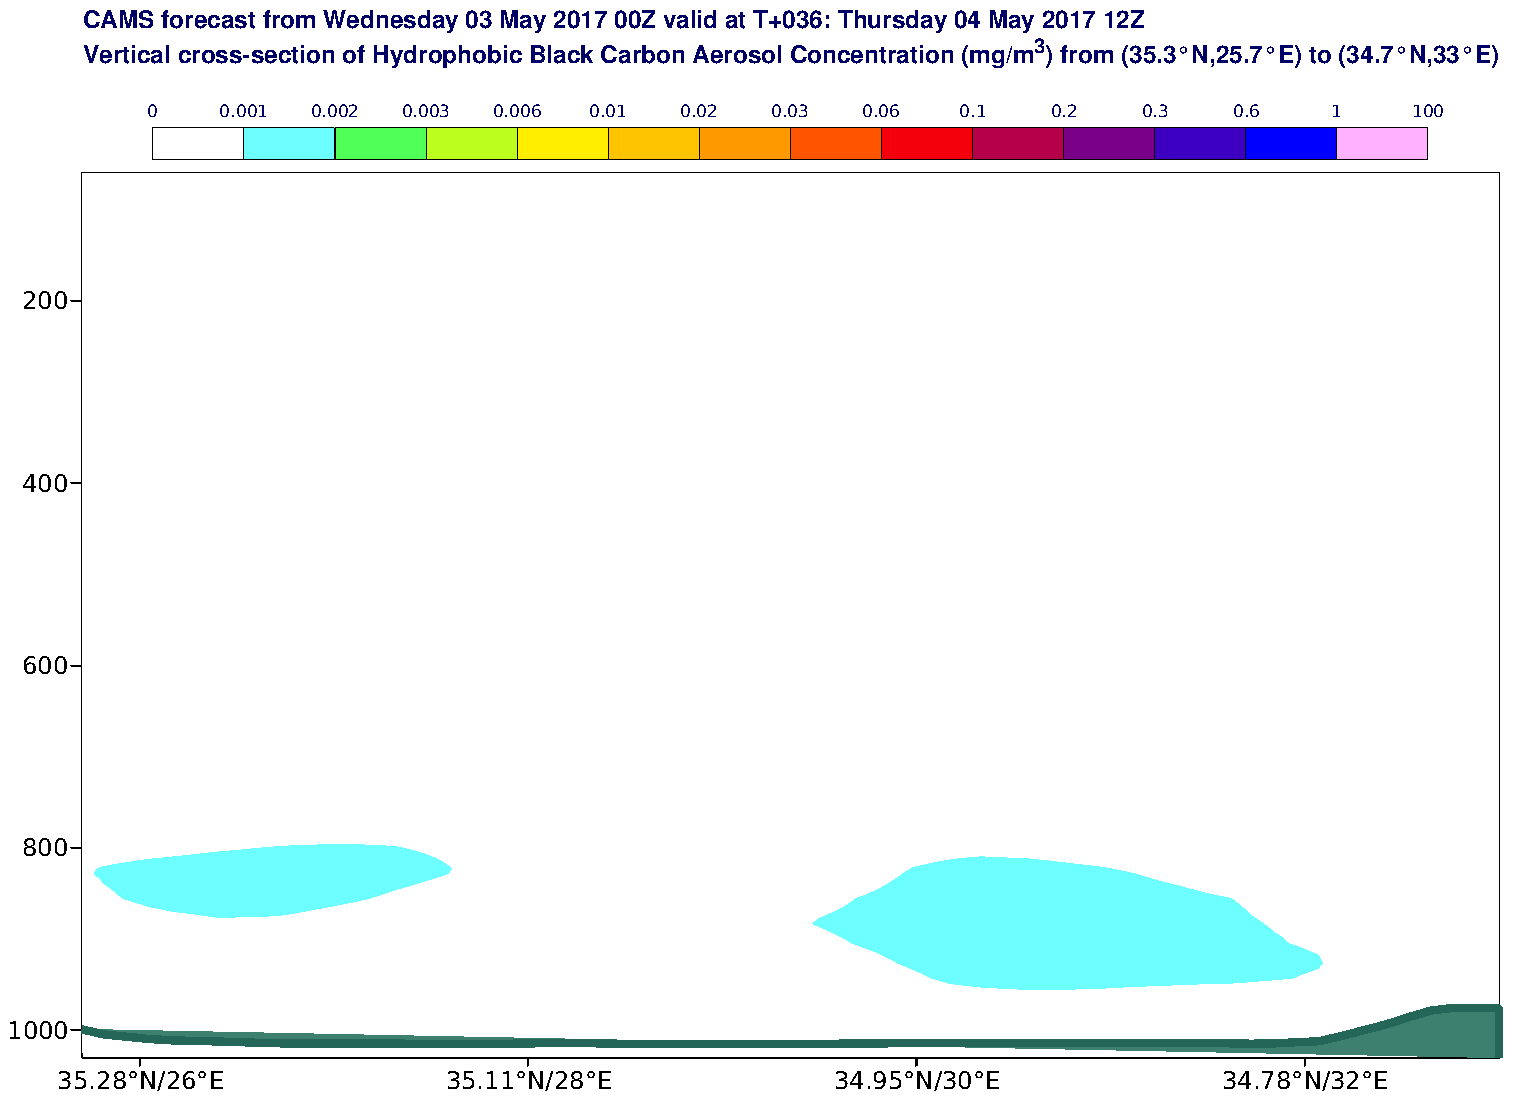 Vertical cross-section of Hydrophobic Black Carbon Aerosol Concentration (mg/m3) valid at T36 - 2017-05-04 12:00